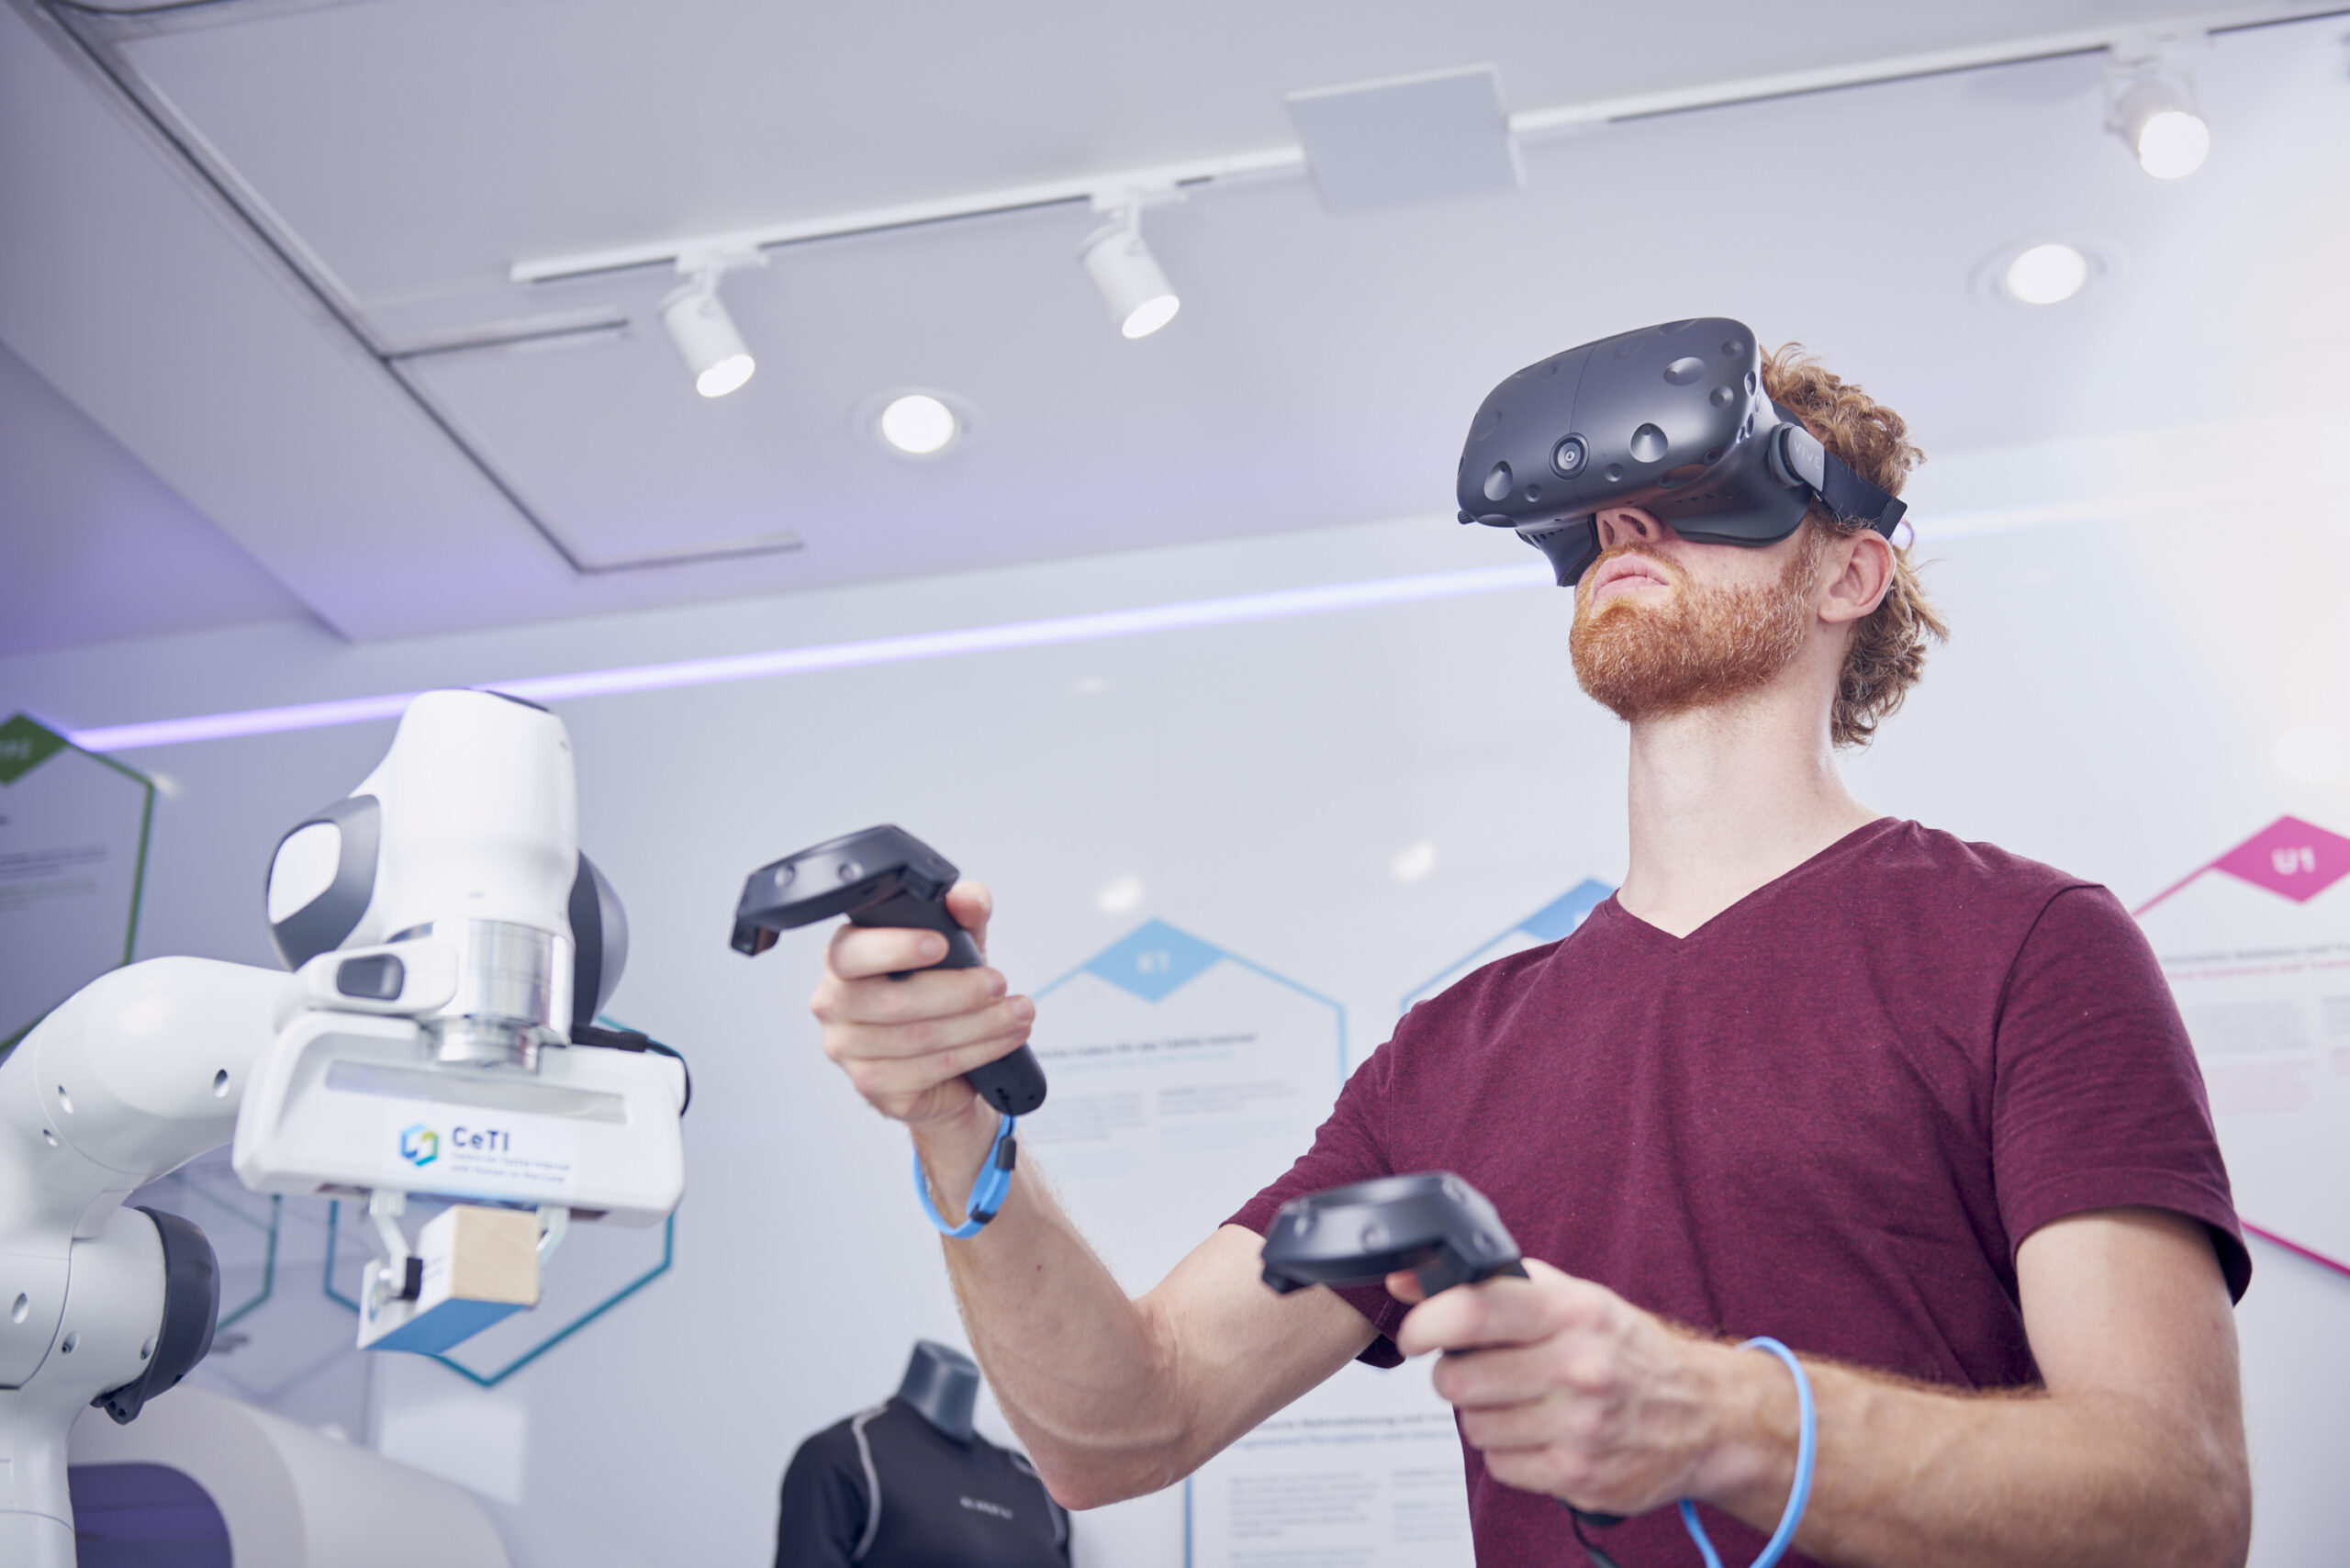 A man wearing a virtual reality visor and holding two controllers. Next to the man we see a robotic arm.